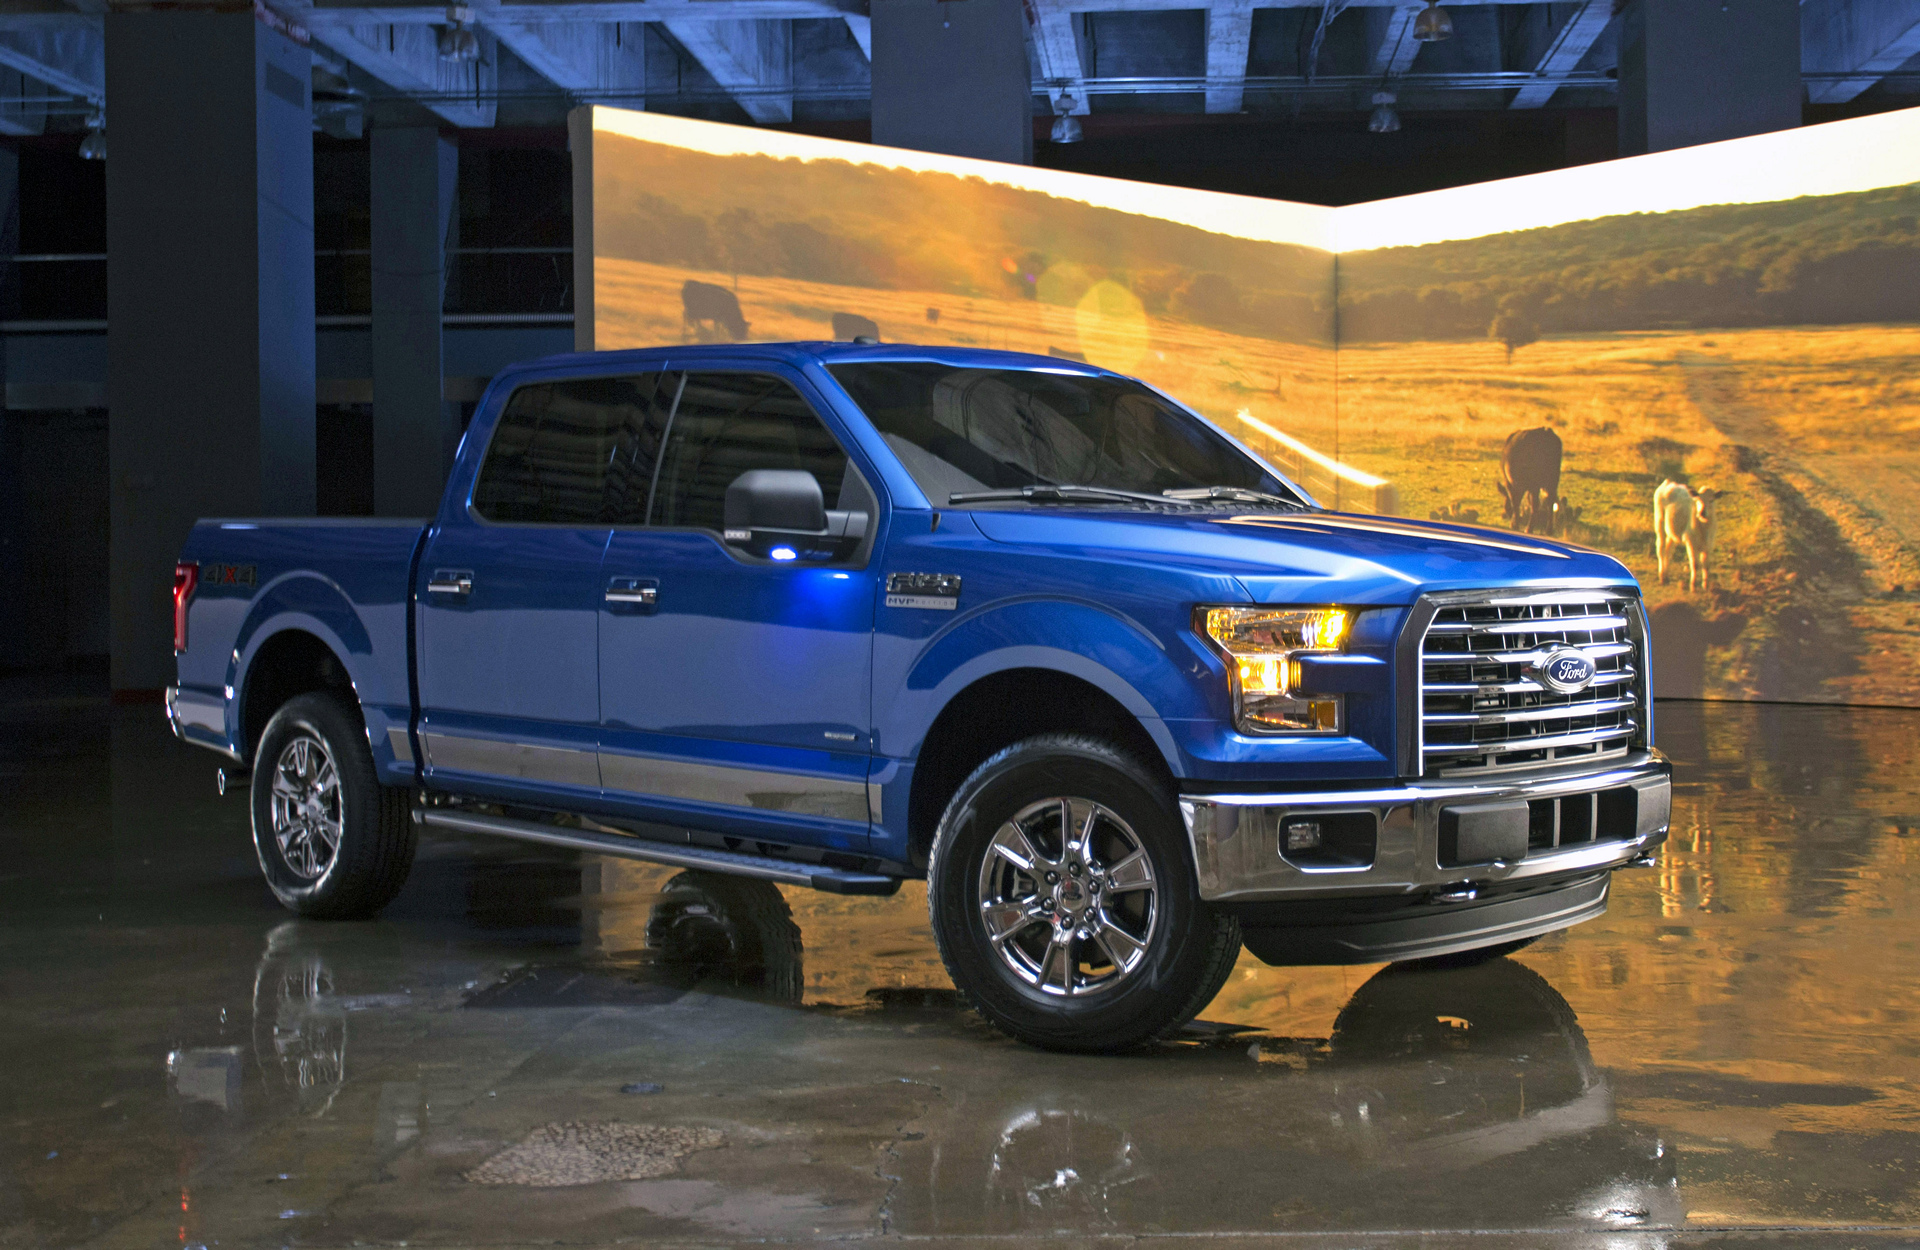 2016 Ford F-150 MVP Edition © Ford Motor Company